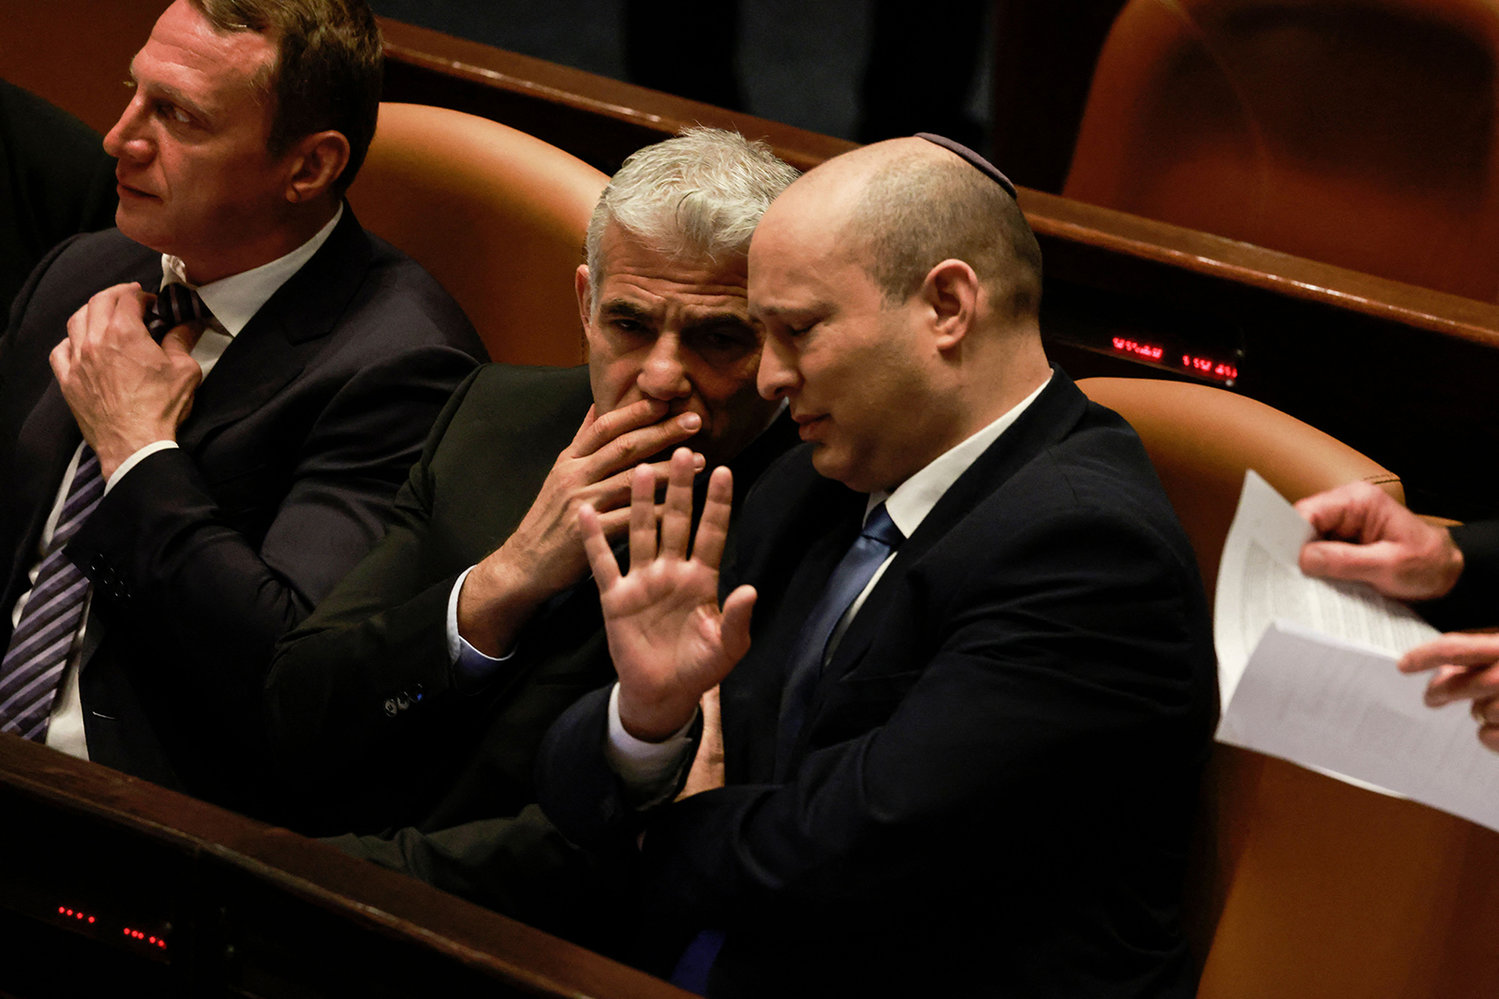 Israeli Minister of Foreign Affairs Yair Lapid (left) and outgoing Prime Minister Naftali Bennett, speak to each other at the Knesset (parliament), following the dissolution of the parliament, in Jerusalem on June 30, 2022. - Israeli lawmakers dissolved parliament today, forcing the country's fifth election in less than four years, with Foreign Minister Yair Lapid set to take over as caretaker prime minister at midnight. The final dissolution bill, which passed with 92 votes in favour none against, ends the year-long premiership of Naftali Bennett, who led an eight-party coalition that was backed by an Arab party, a first in Israeli history. (Menahem Kahana/AFP via Getty Images/TNS)